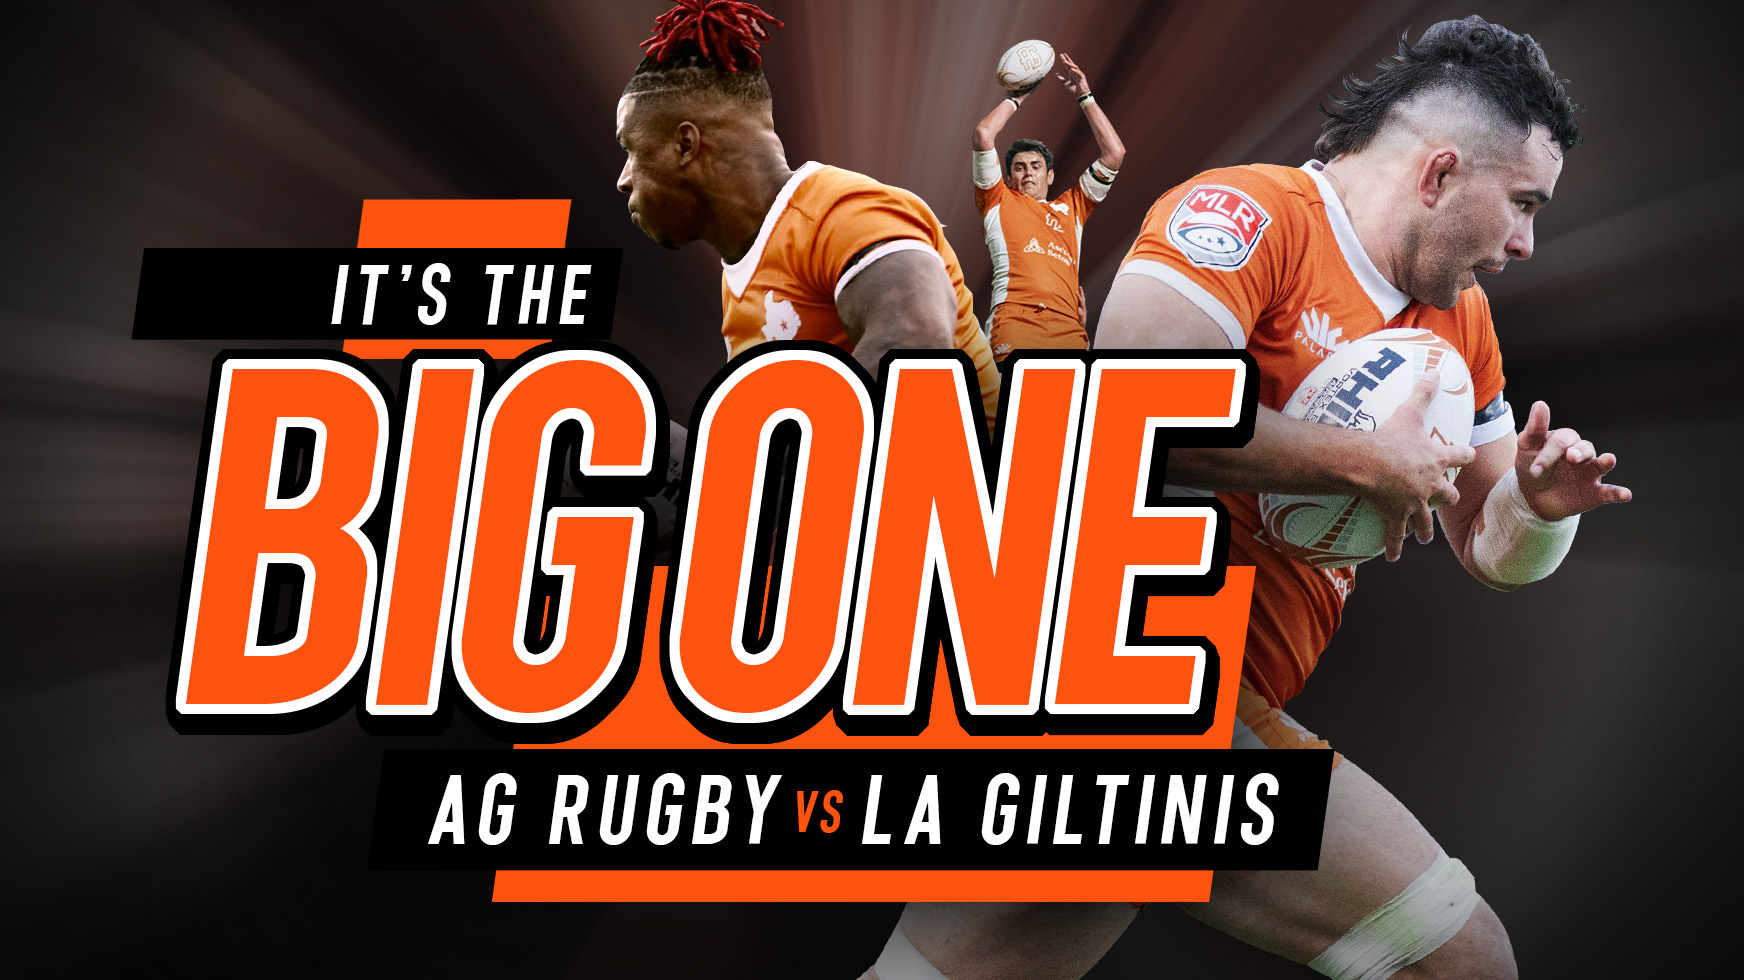 ‘The Big One’ | AG vs LA May 19th – Get Your Tickets Now!